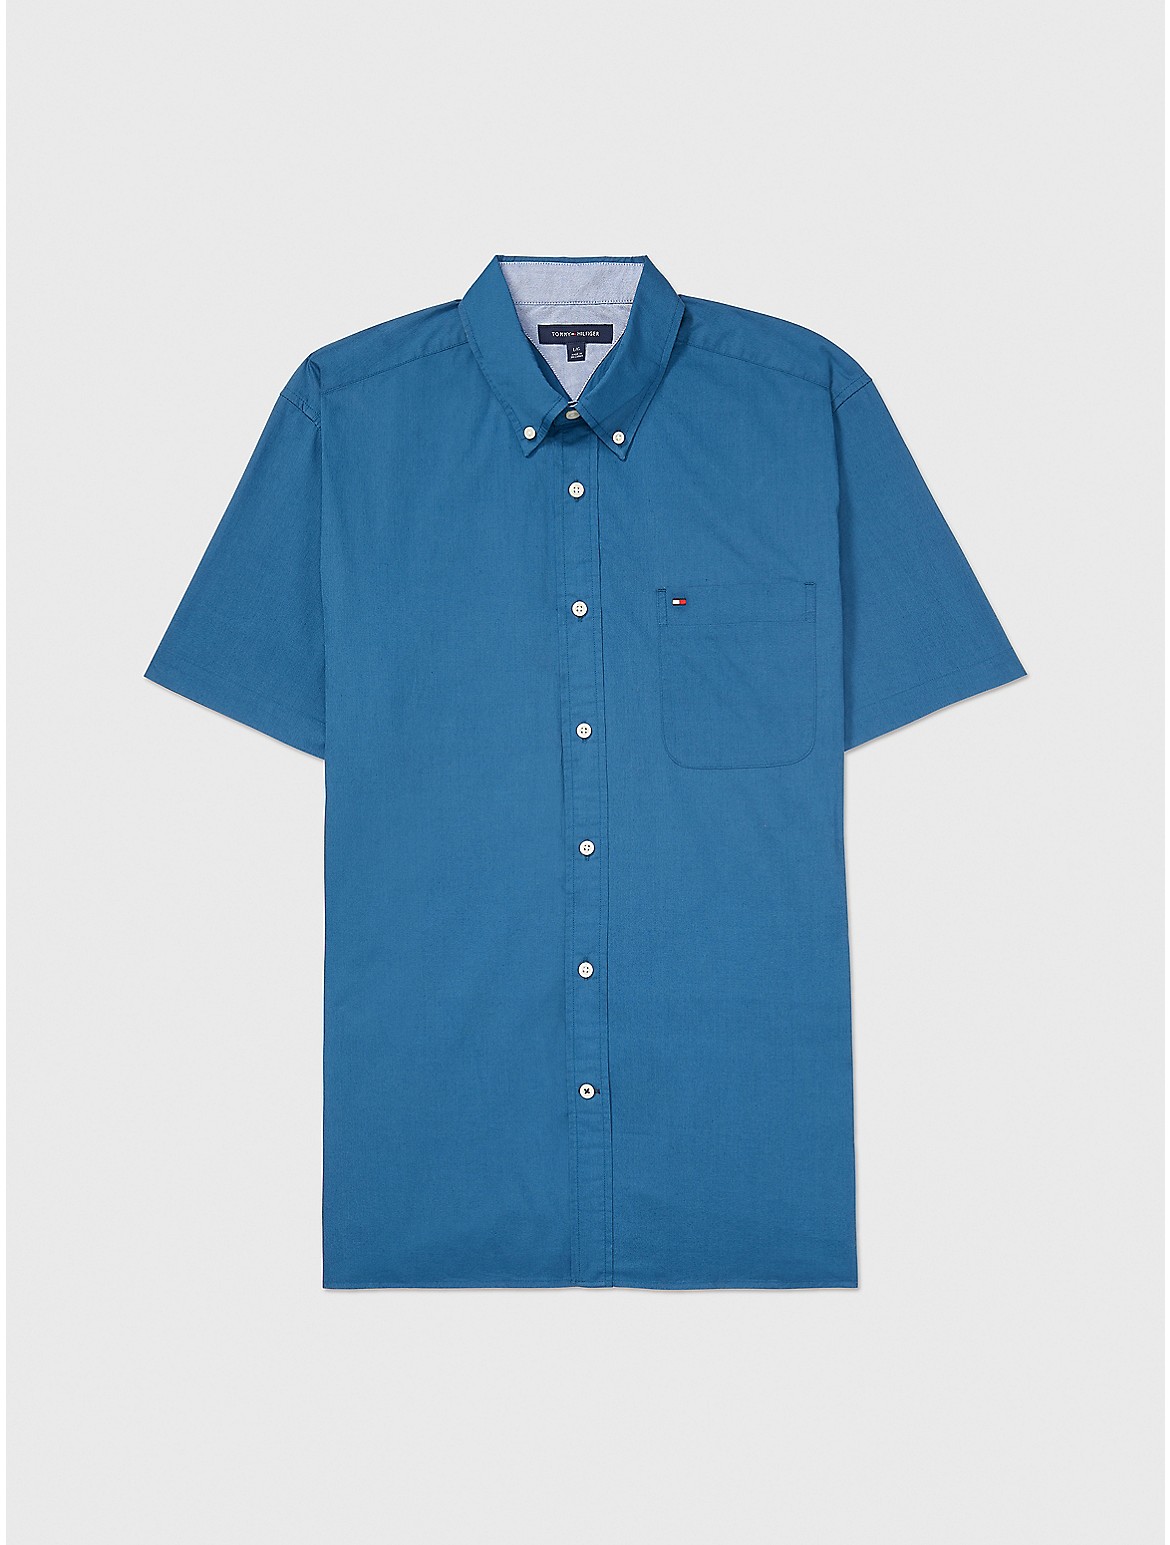 Tommy Hilfiger Seated Fit Solid Shirt In Alfalfa Blue